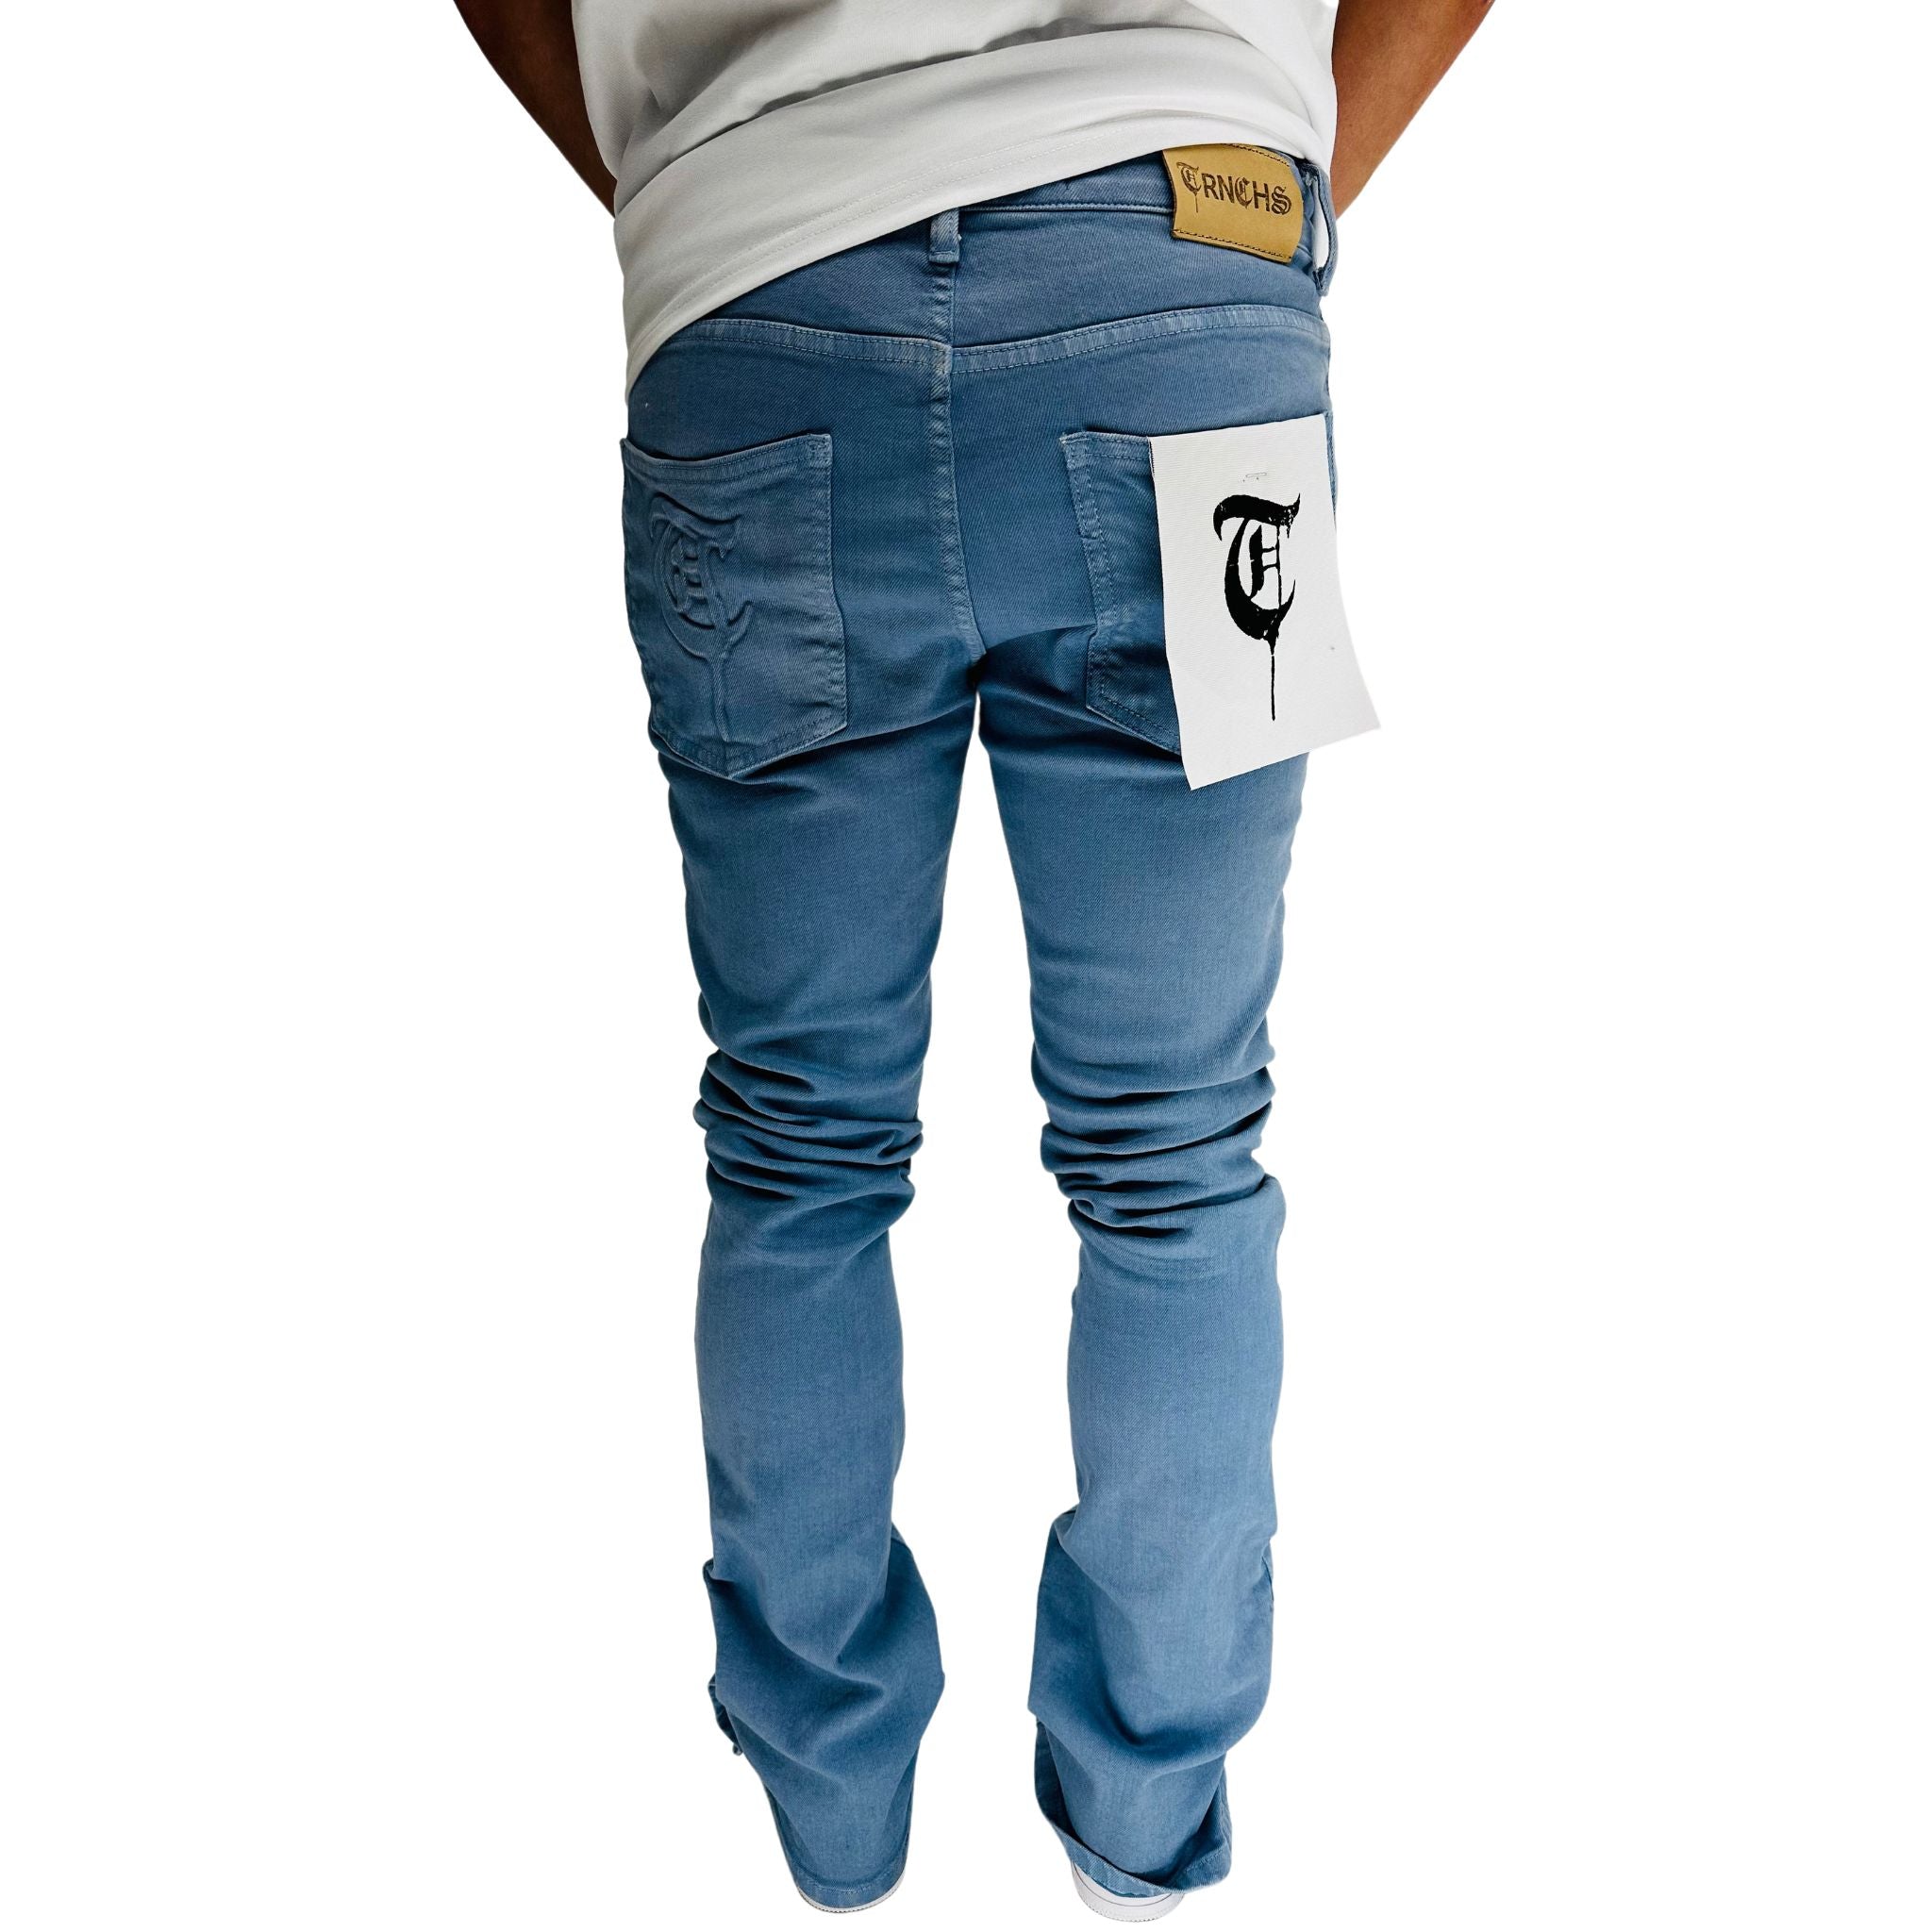 TRNCHS Button Fly Blue Jeans